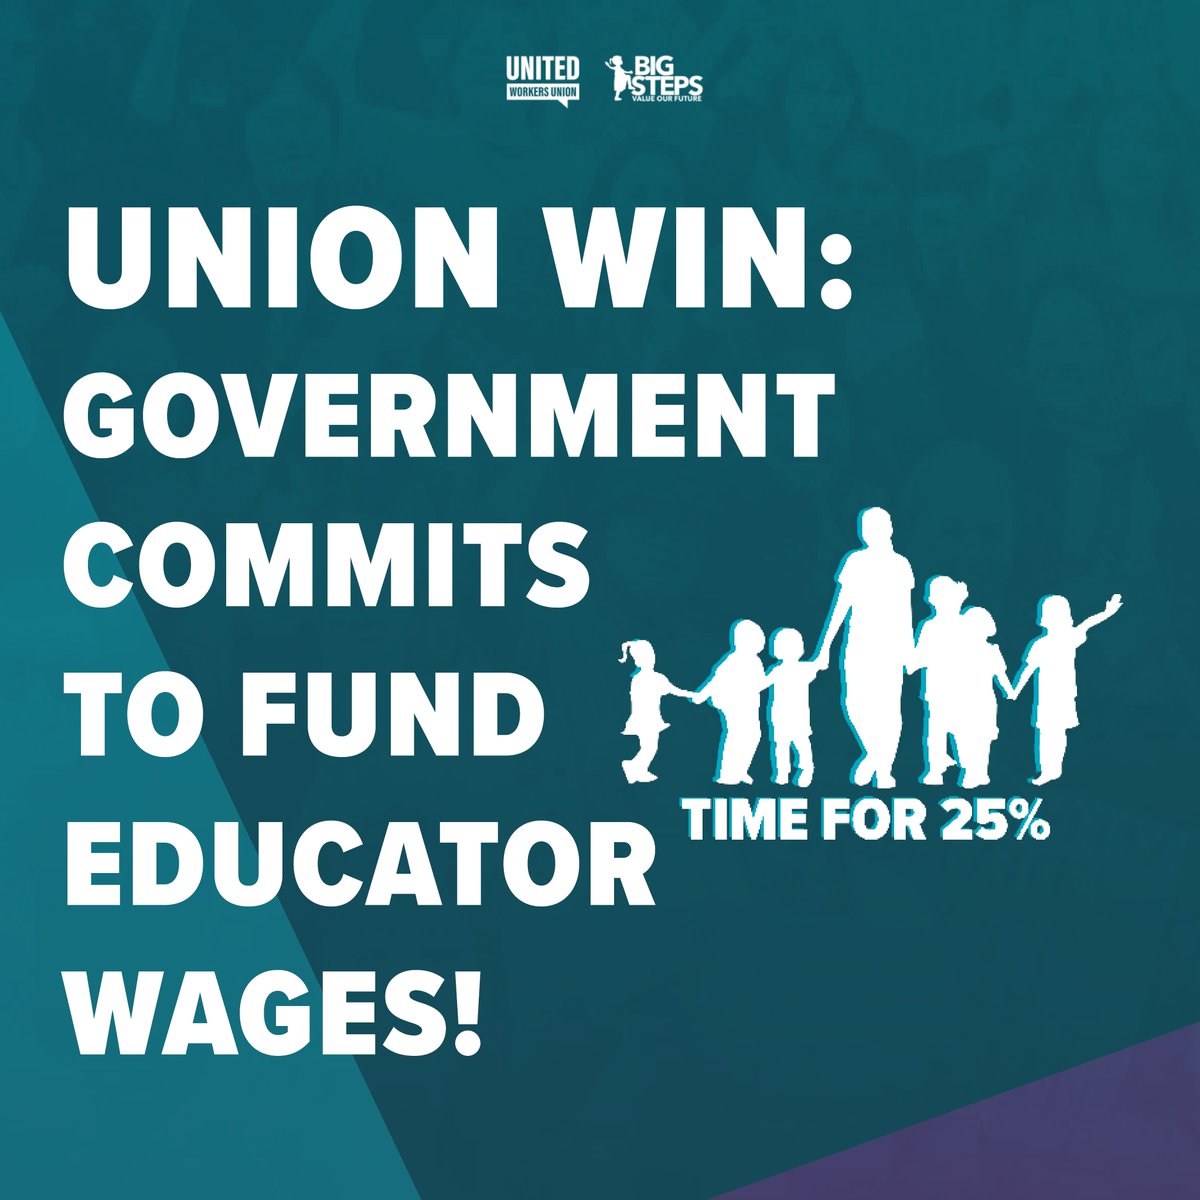 GROUNDBREAKING COMMITMENT TO FUND WAGES PAVES THE WAY FOR A REAL PAY RISE FOR EDUCATORS! 🎉 

The Federal Government has committed to fund educators' wages as part of the new multi-employer agreement. For more: bigsteps.org.au/early-childhoo…. 

#budget24 #auspol #ausunions